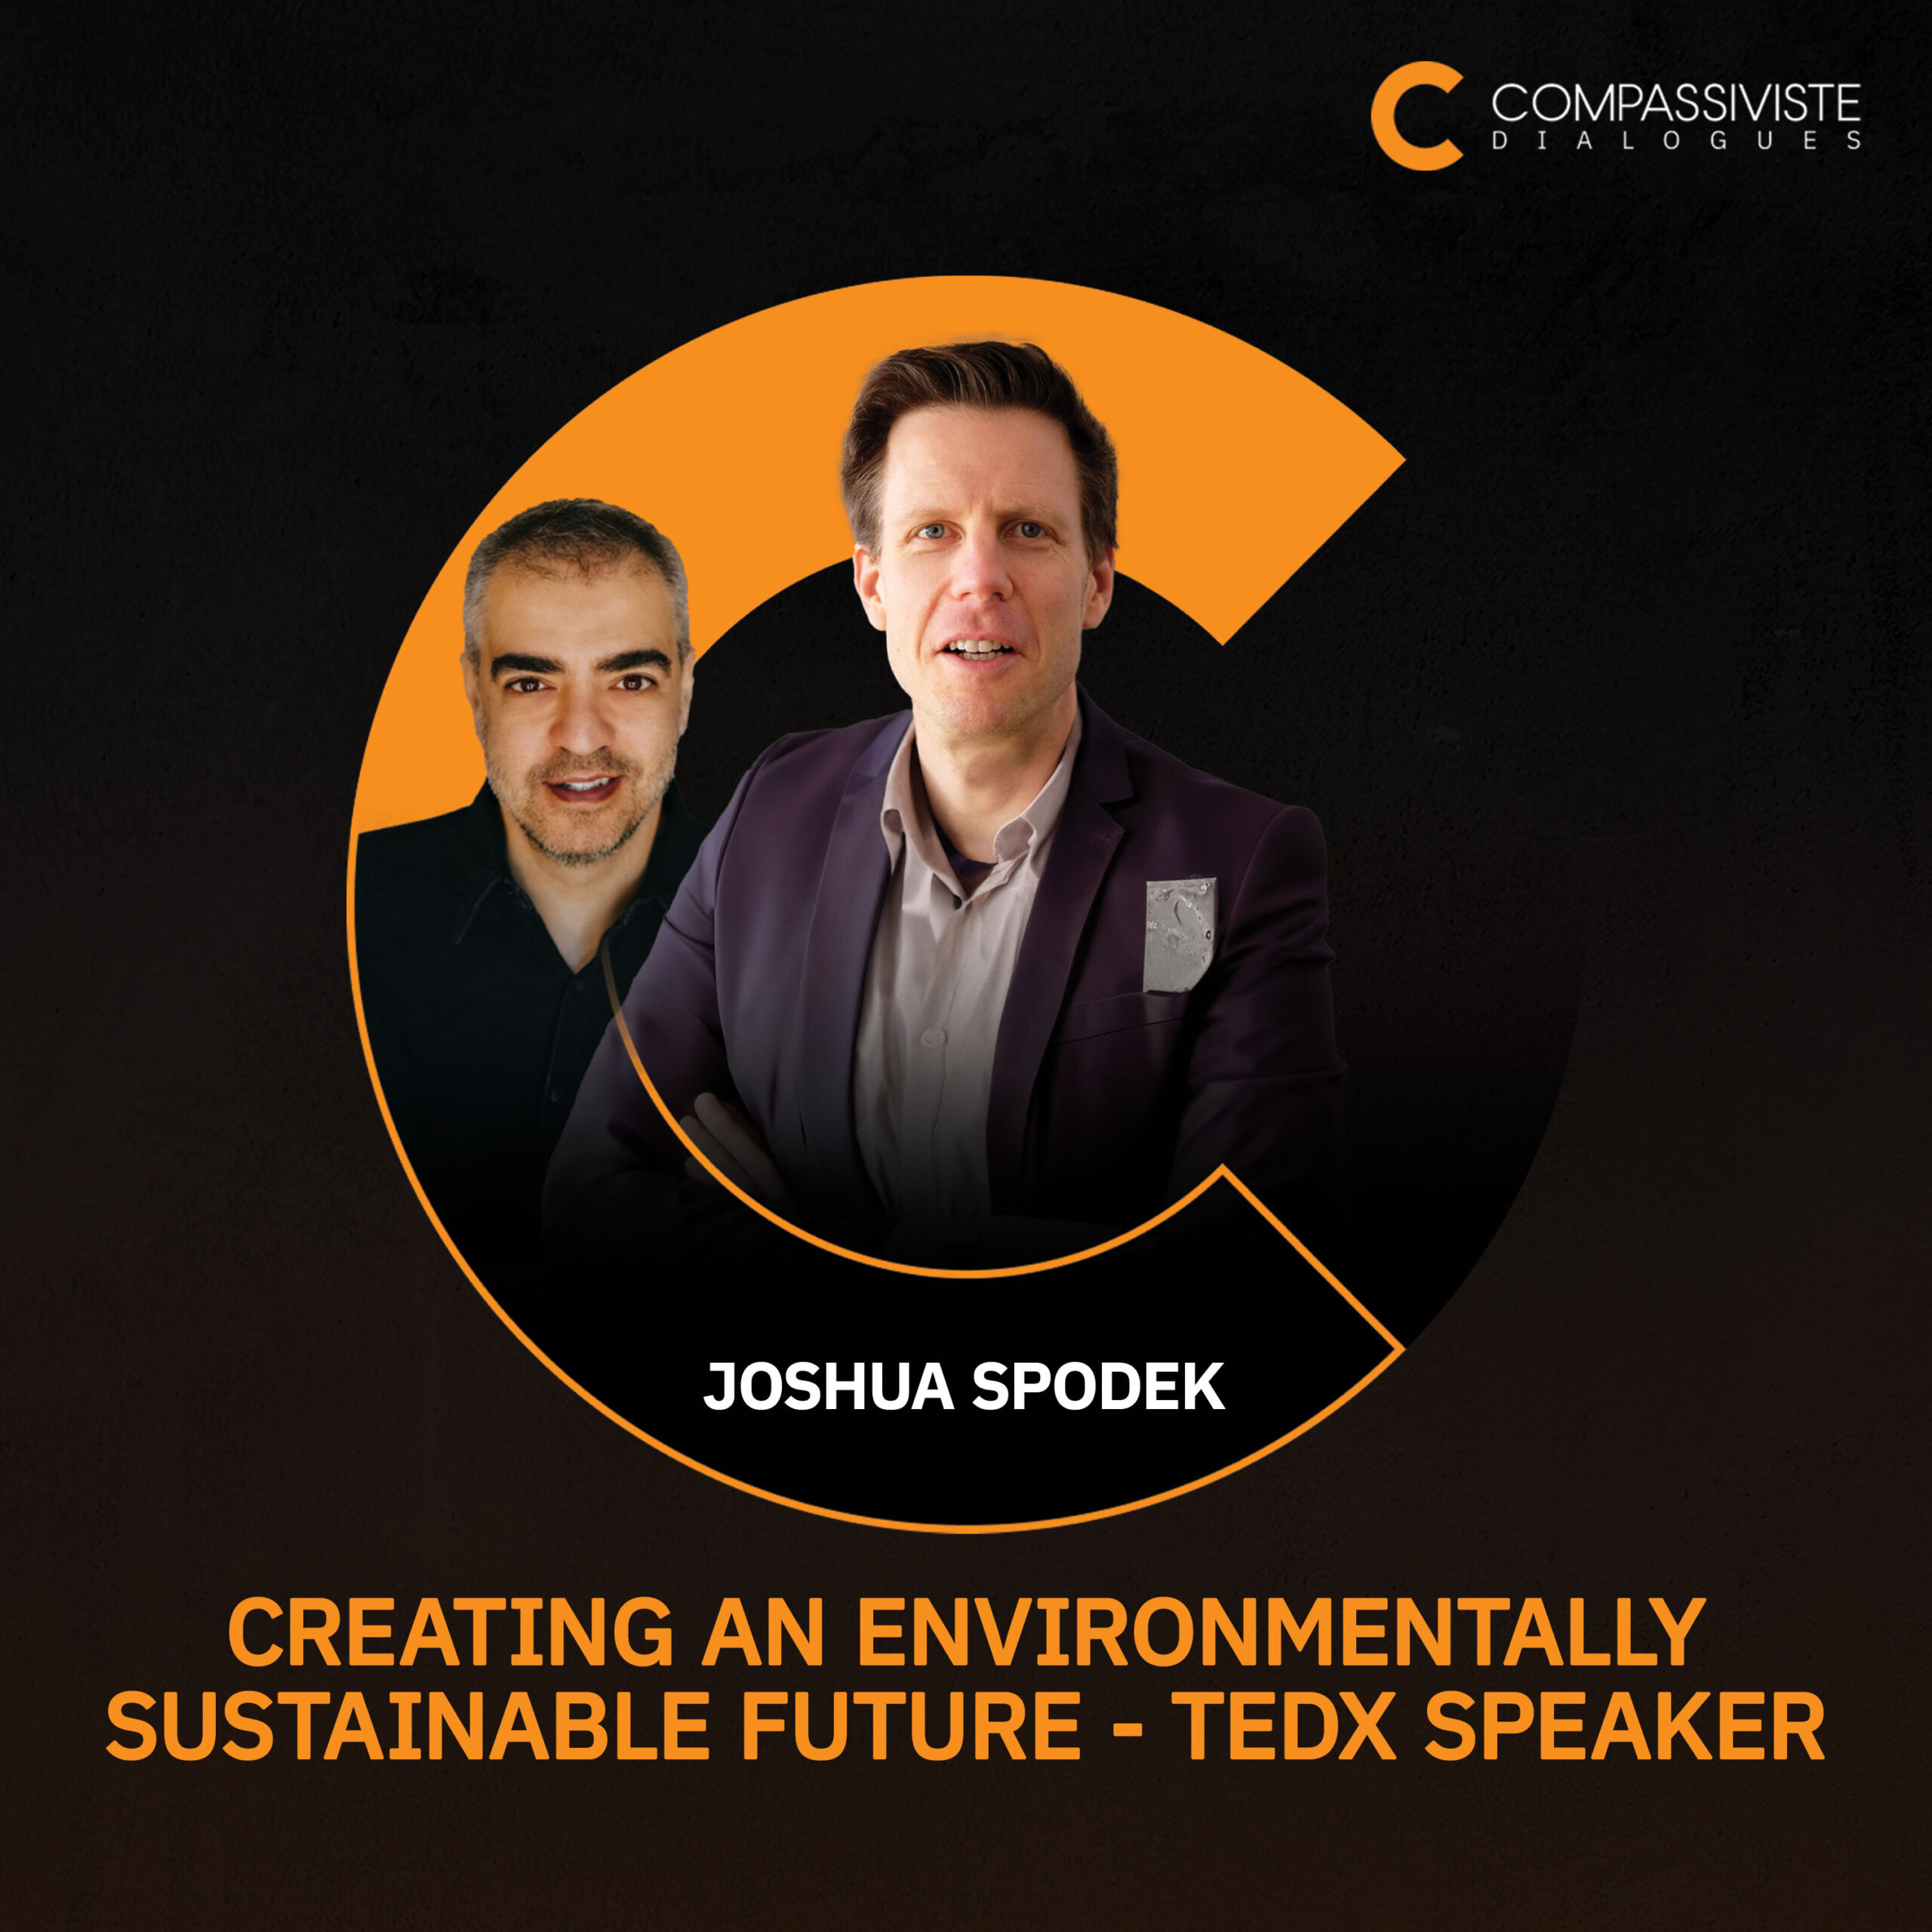 On this photo there are 2 persons Ali Horriyat and Joshua Spodek incorporated into the Compassiviste Logo which is represented by letter C. There is name of the guest of this episode Joshua Spodek written below them and name of the first episode of the Compassiviste Dialogues podcast which is "Creating An Environmentally Sustainable Future - TEDx Speaker"